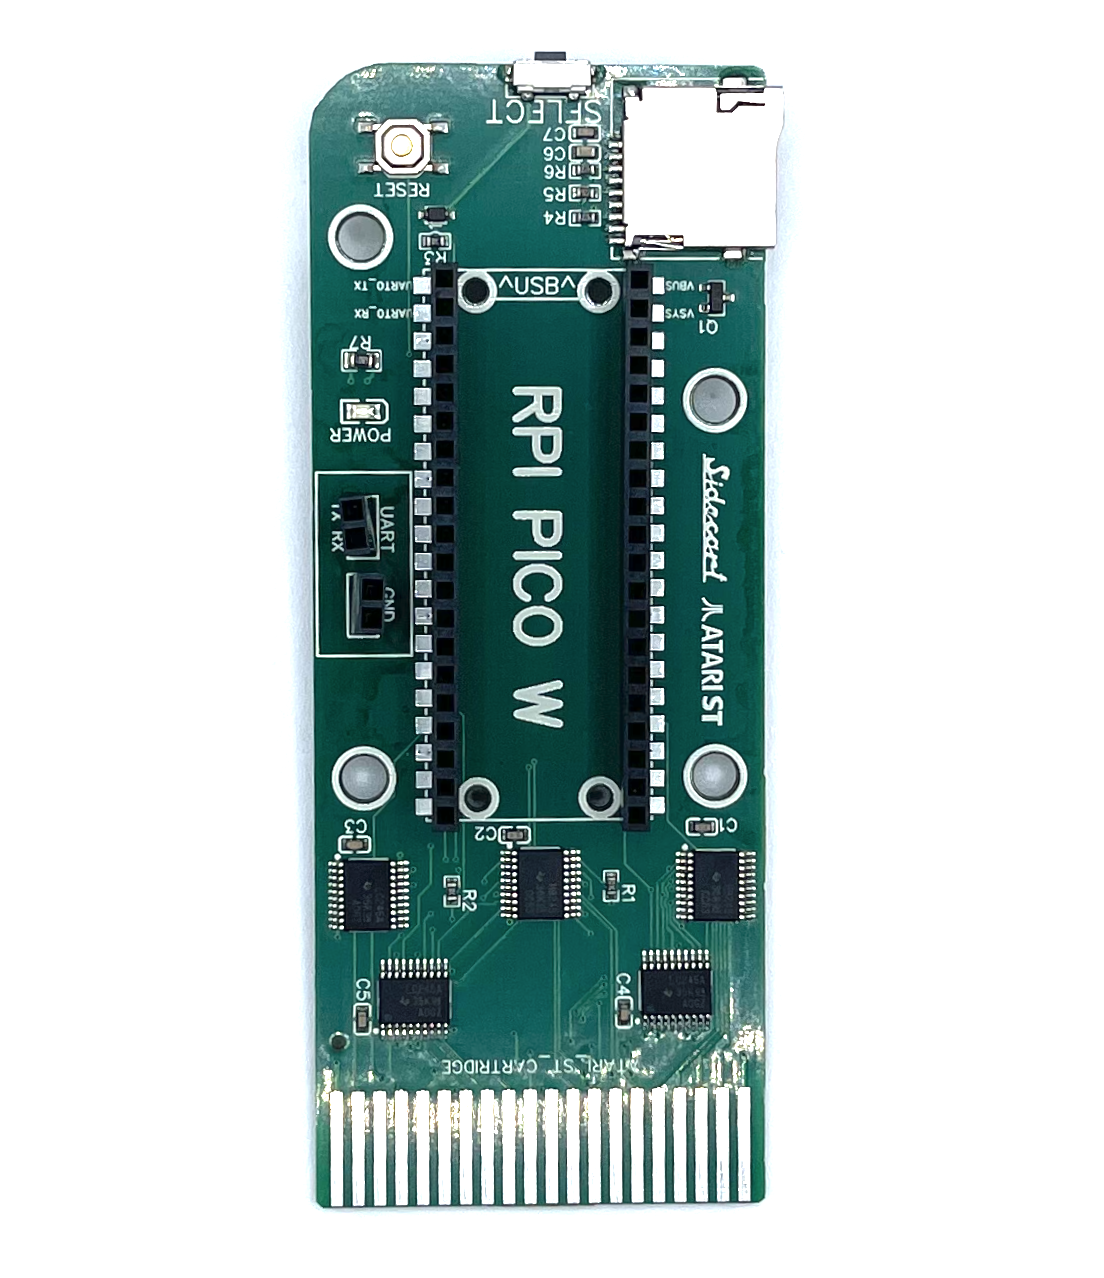 SidecarT board for developers - RPi Pico WH INCLUDED